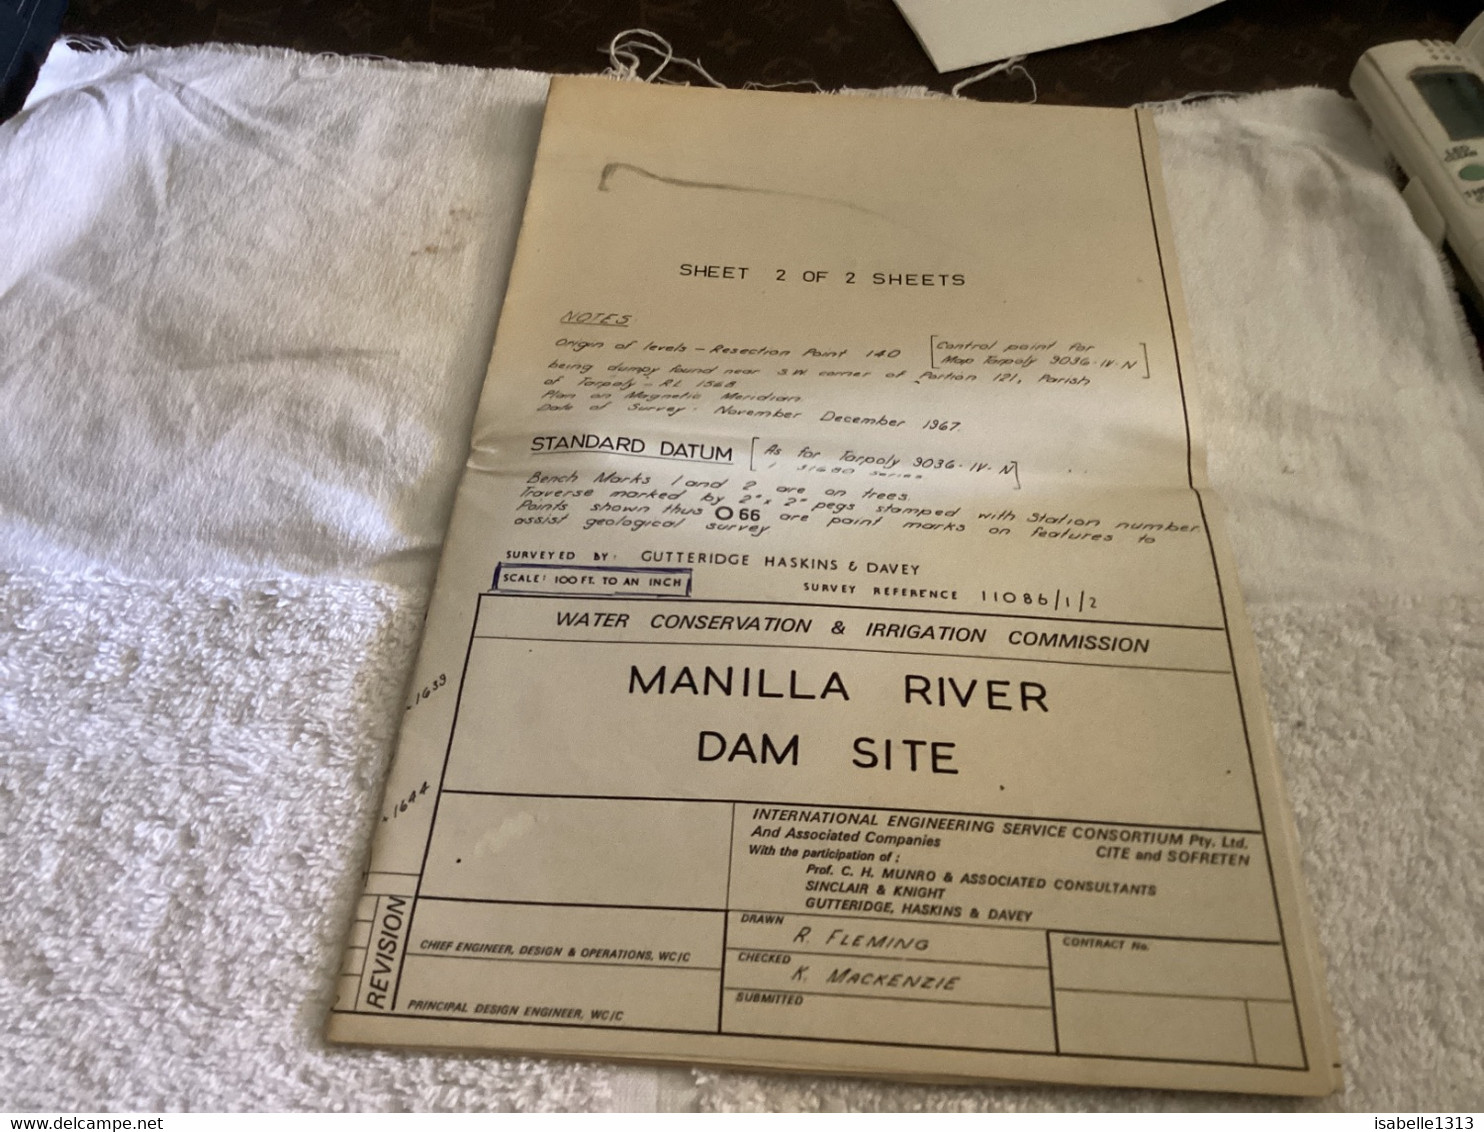 WATER CONSERVATION & IRRIGATION COMMISSION MANILLA RIVER UPSTREAM SITE FILL TYPE DAM. LAYOUT AND CROSS SECTIONS - Arbeitsbeschaffung